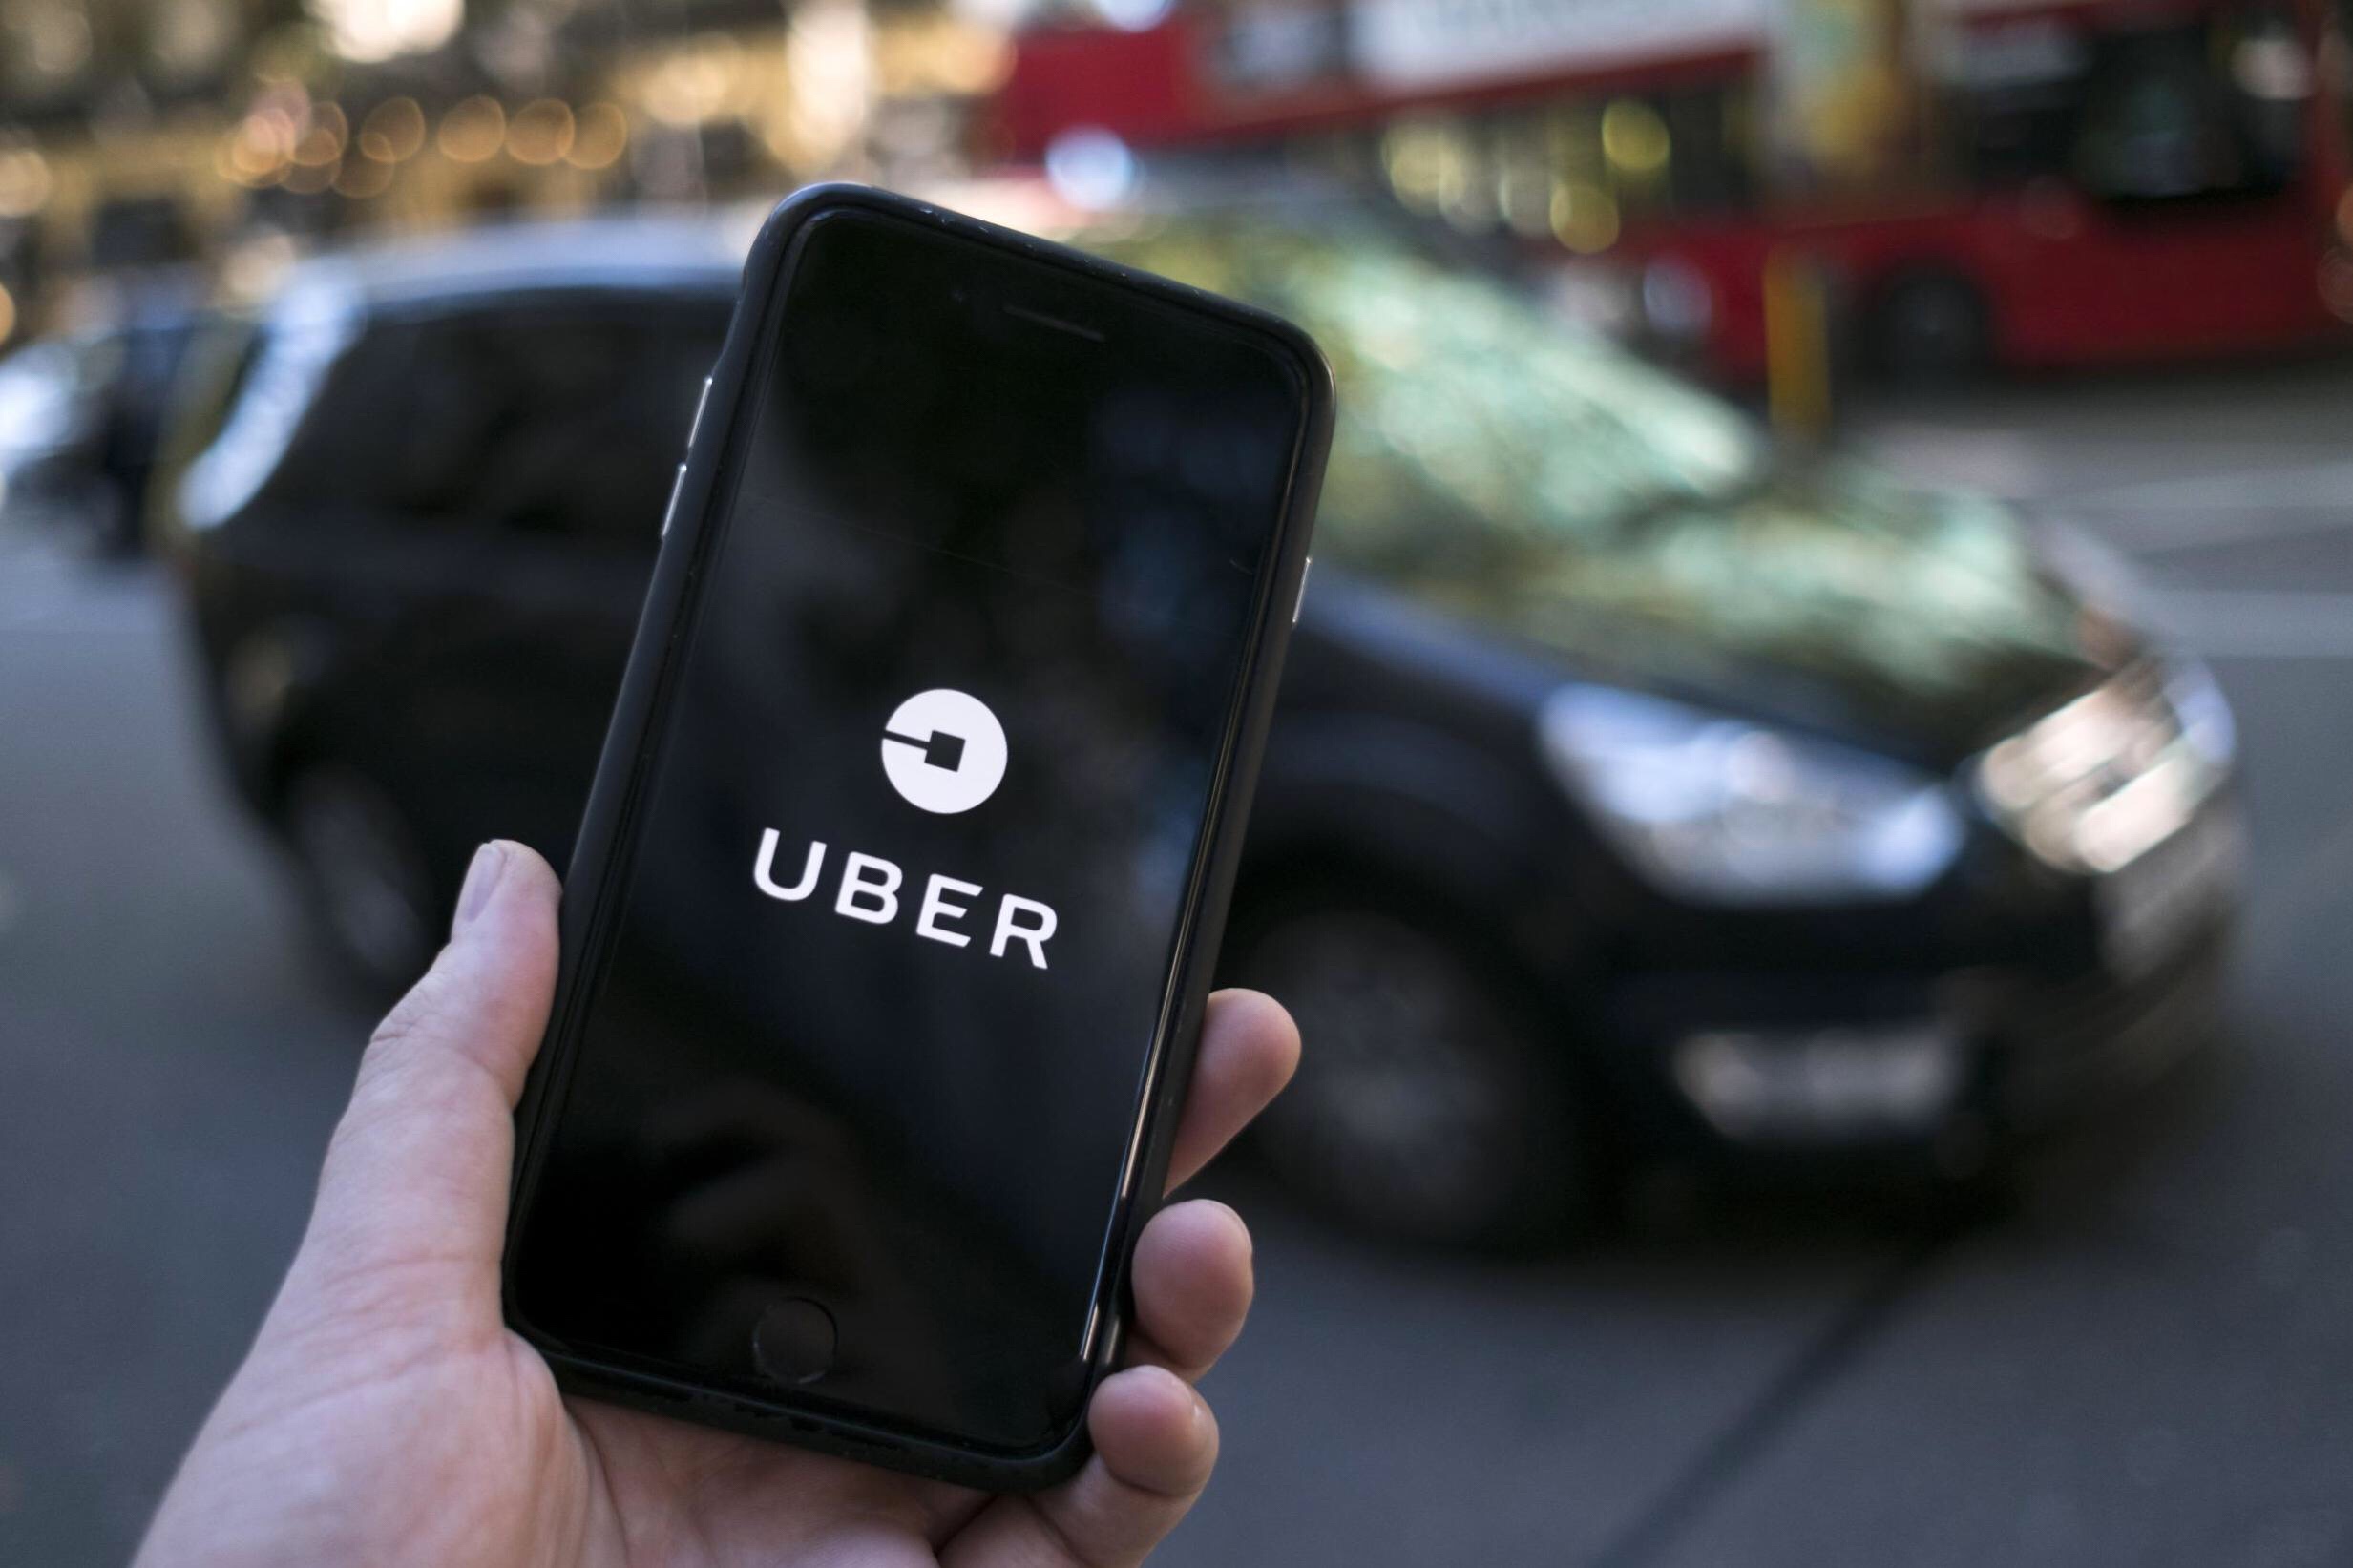 Pennsylvania is suing Uber over 2016 data breach